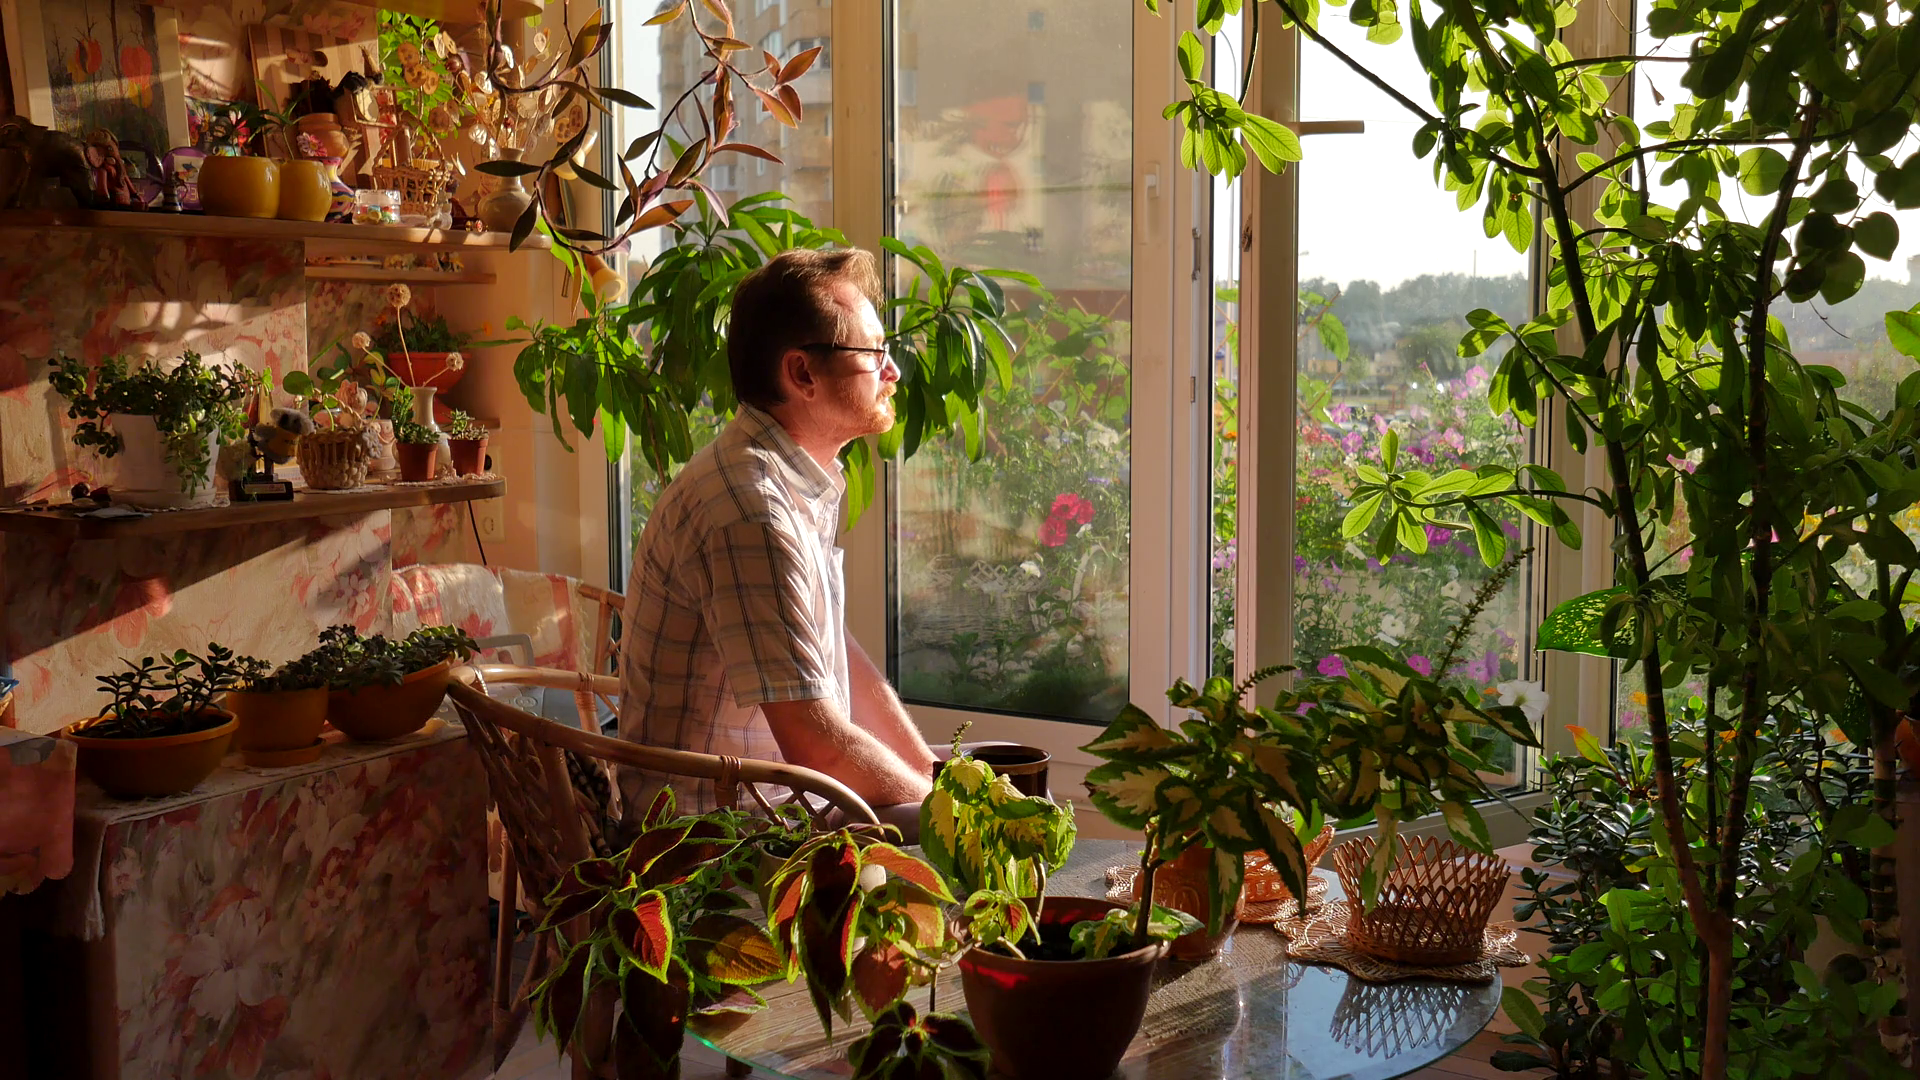 videoblocks-man-gets-up-toward-sun-rays-near-open-window-balcony-flowers-on-the-terrace-sun-rays-lit-mans-face-recreation-at-home-evening-rest-happy-morning-at-home_s3uymevng_thumbnail-full01.png